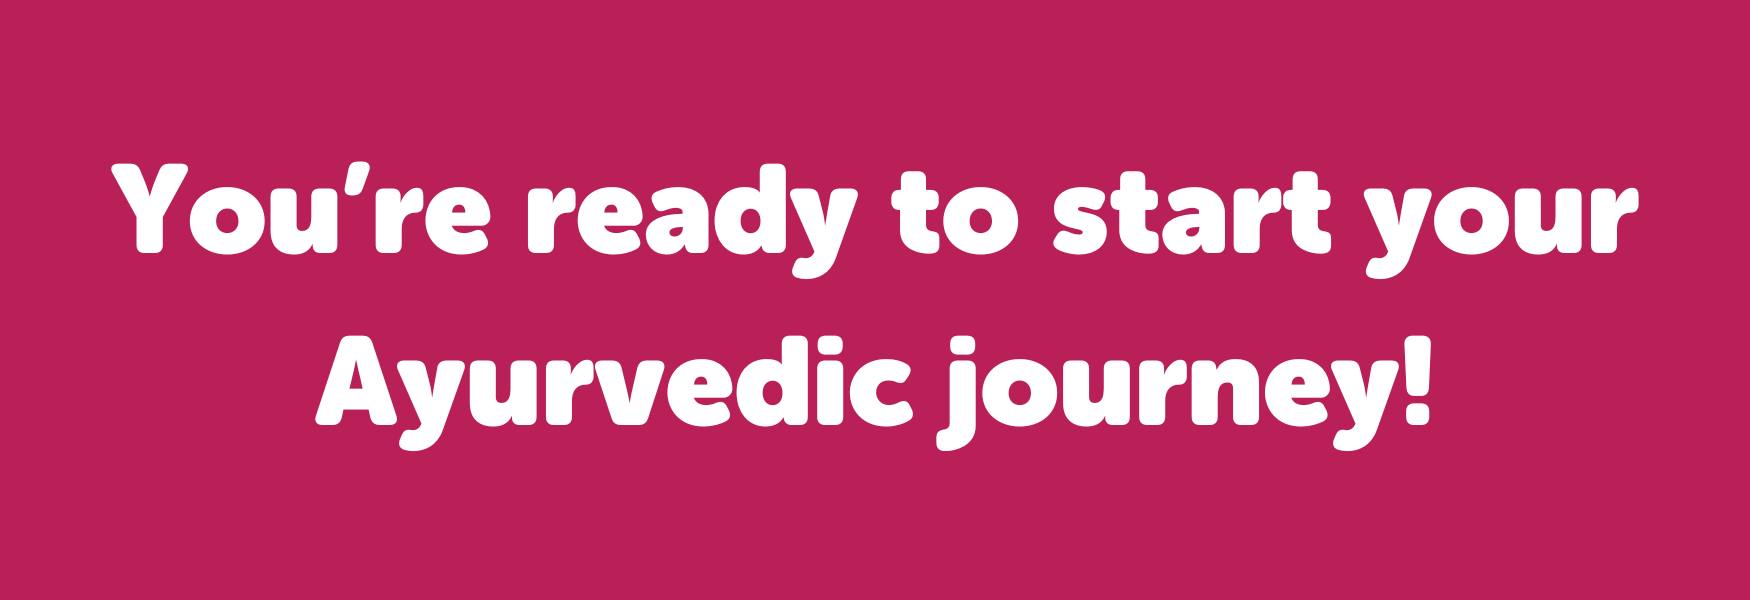 Banner that says you're ready to start your Ayurvedic journey